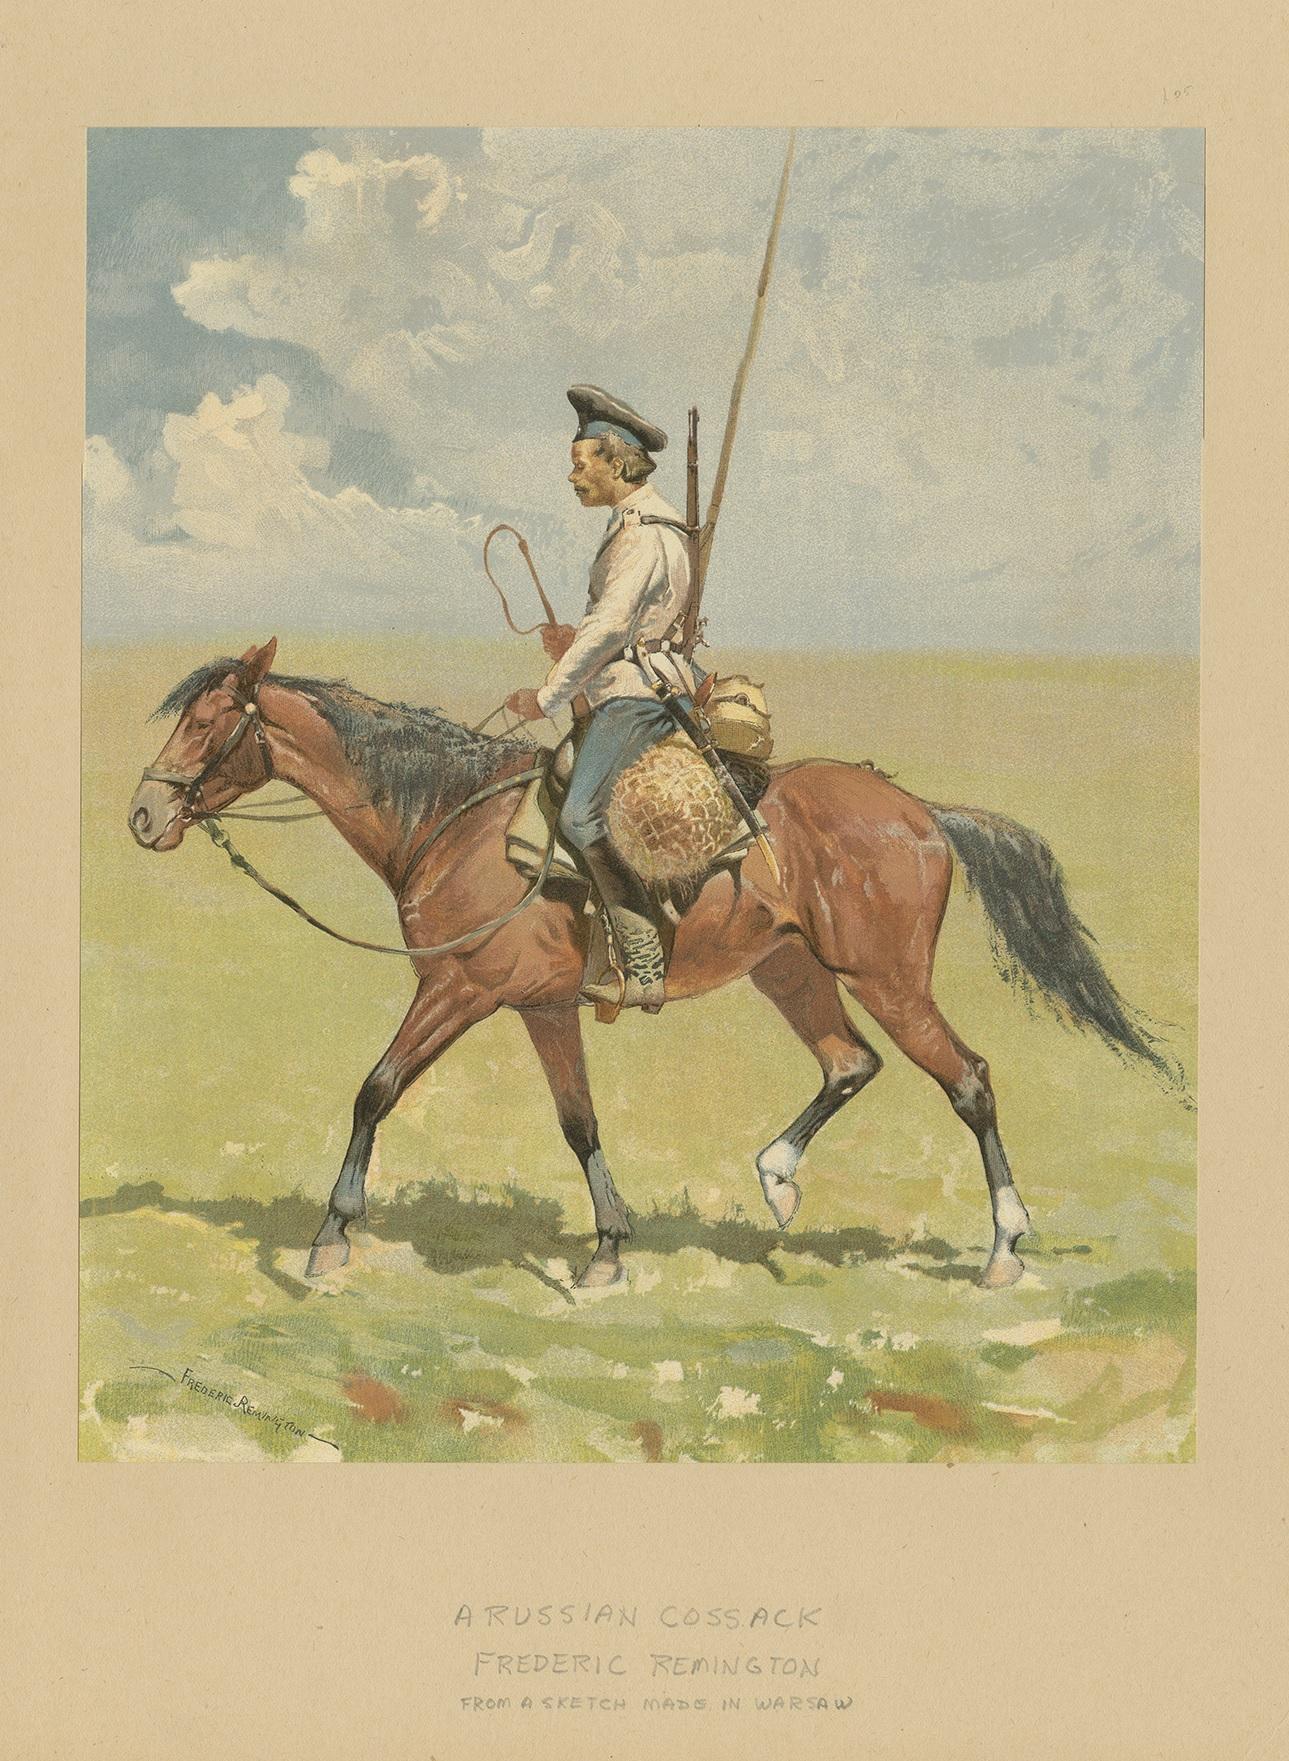 Antique print titled 'A Russian Cossack'. Old color photogravure made after a water color drawing by Frederic Remington. Published circa 1893.